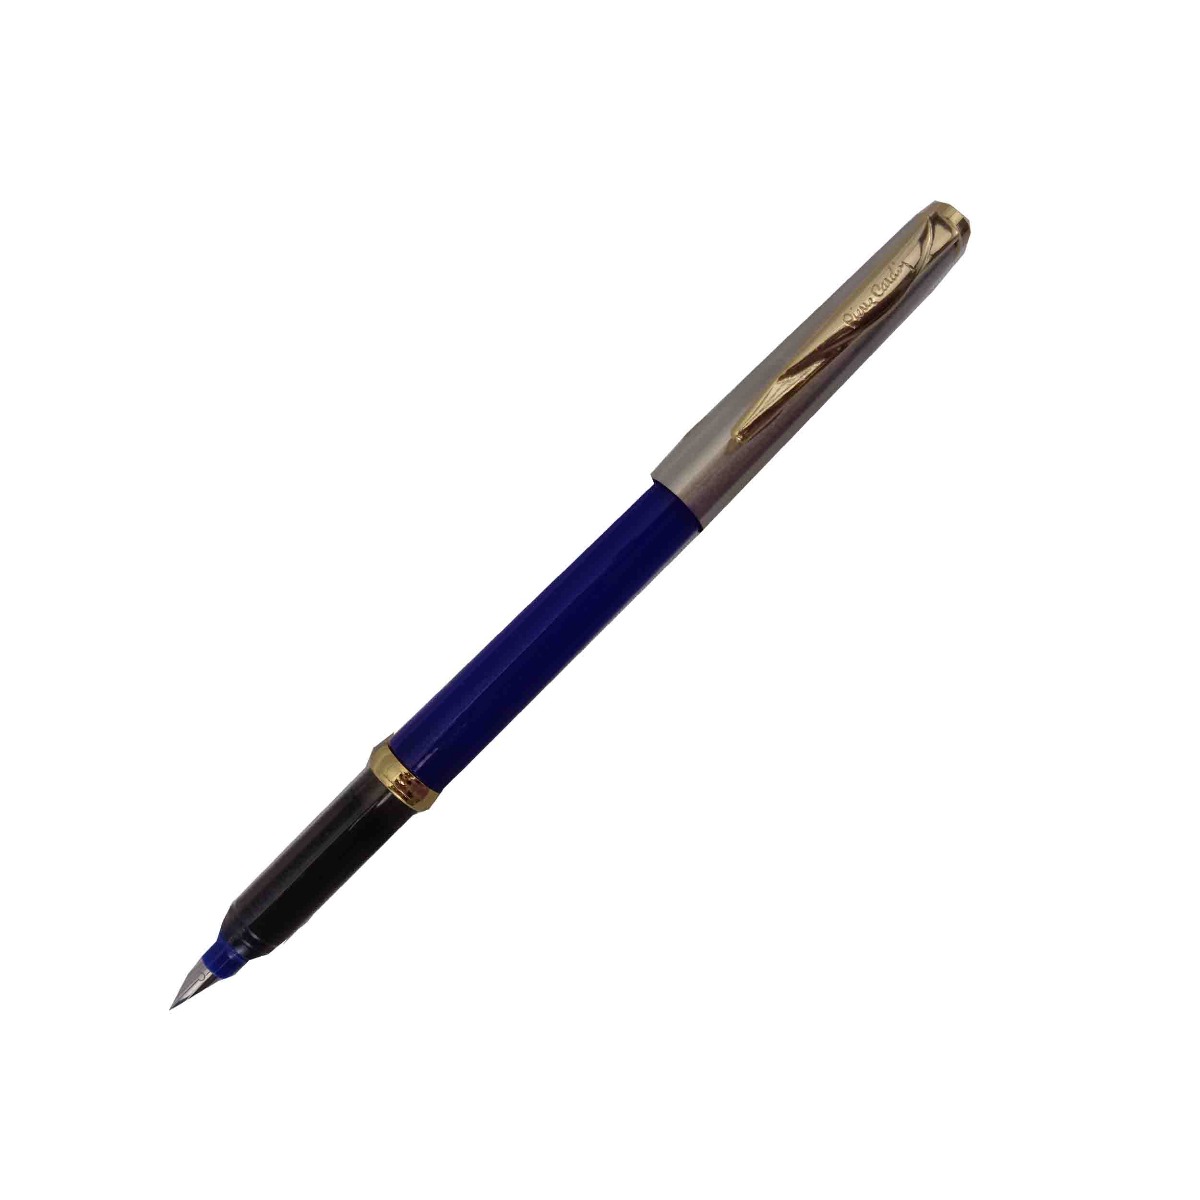 Pierre Cardin Momento Half Gold Model:15612 Blue Color Body With Silver Cap Type Fine Nib With 1 Ink Converter and 2 Extra Long Catridge Fountain Pen